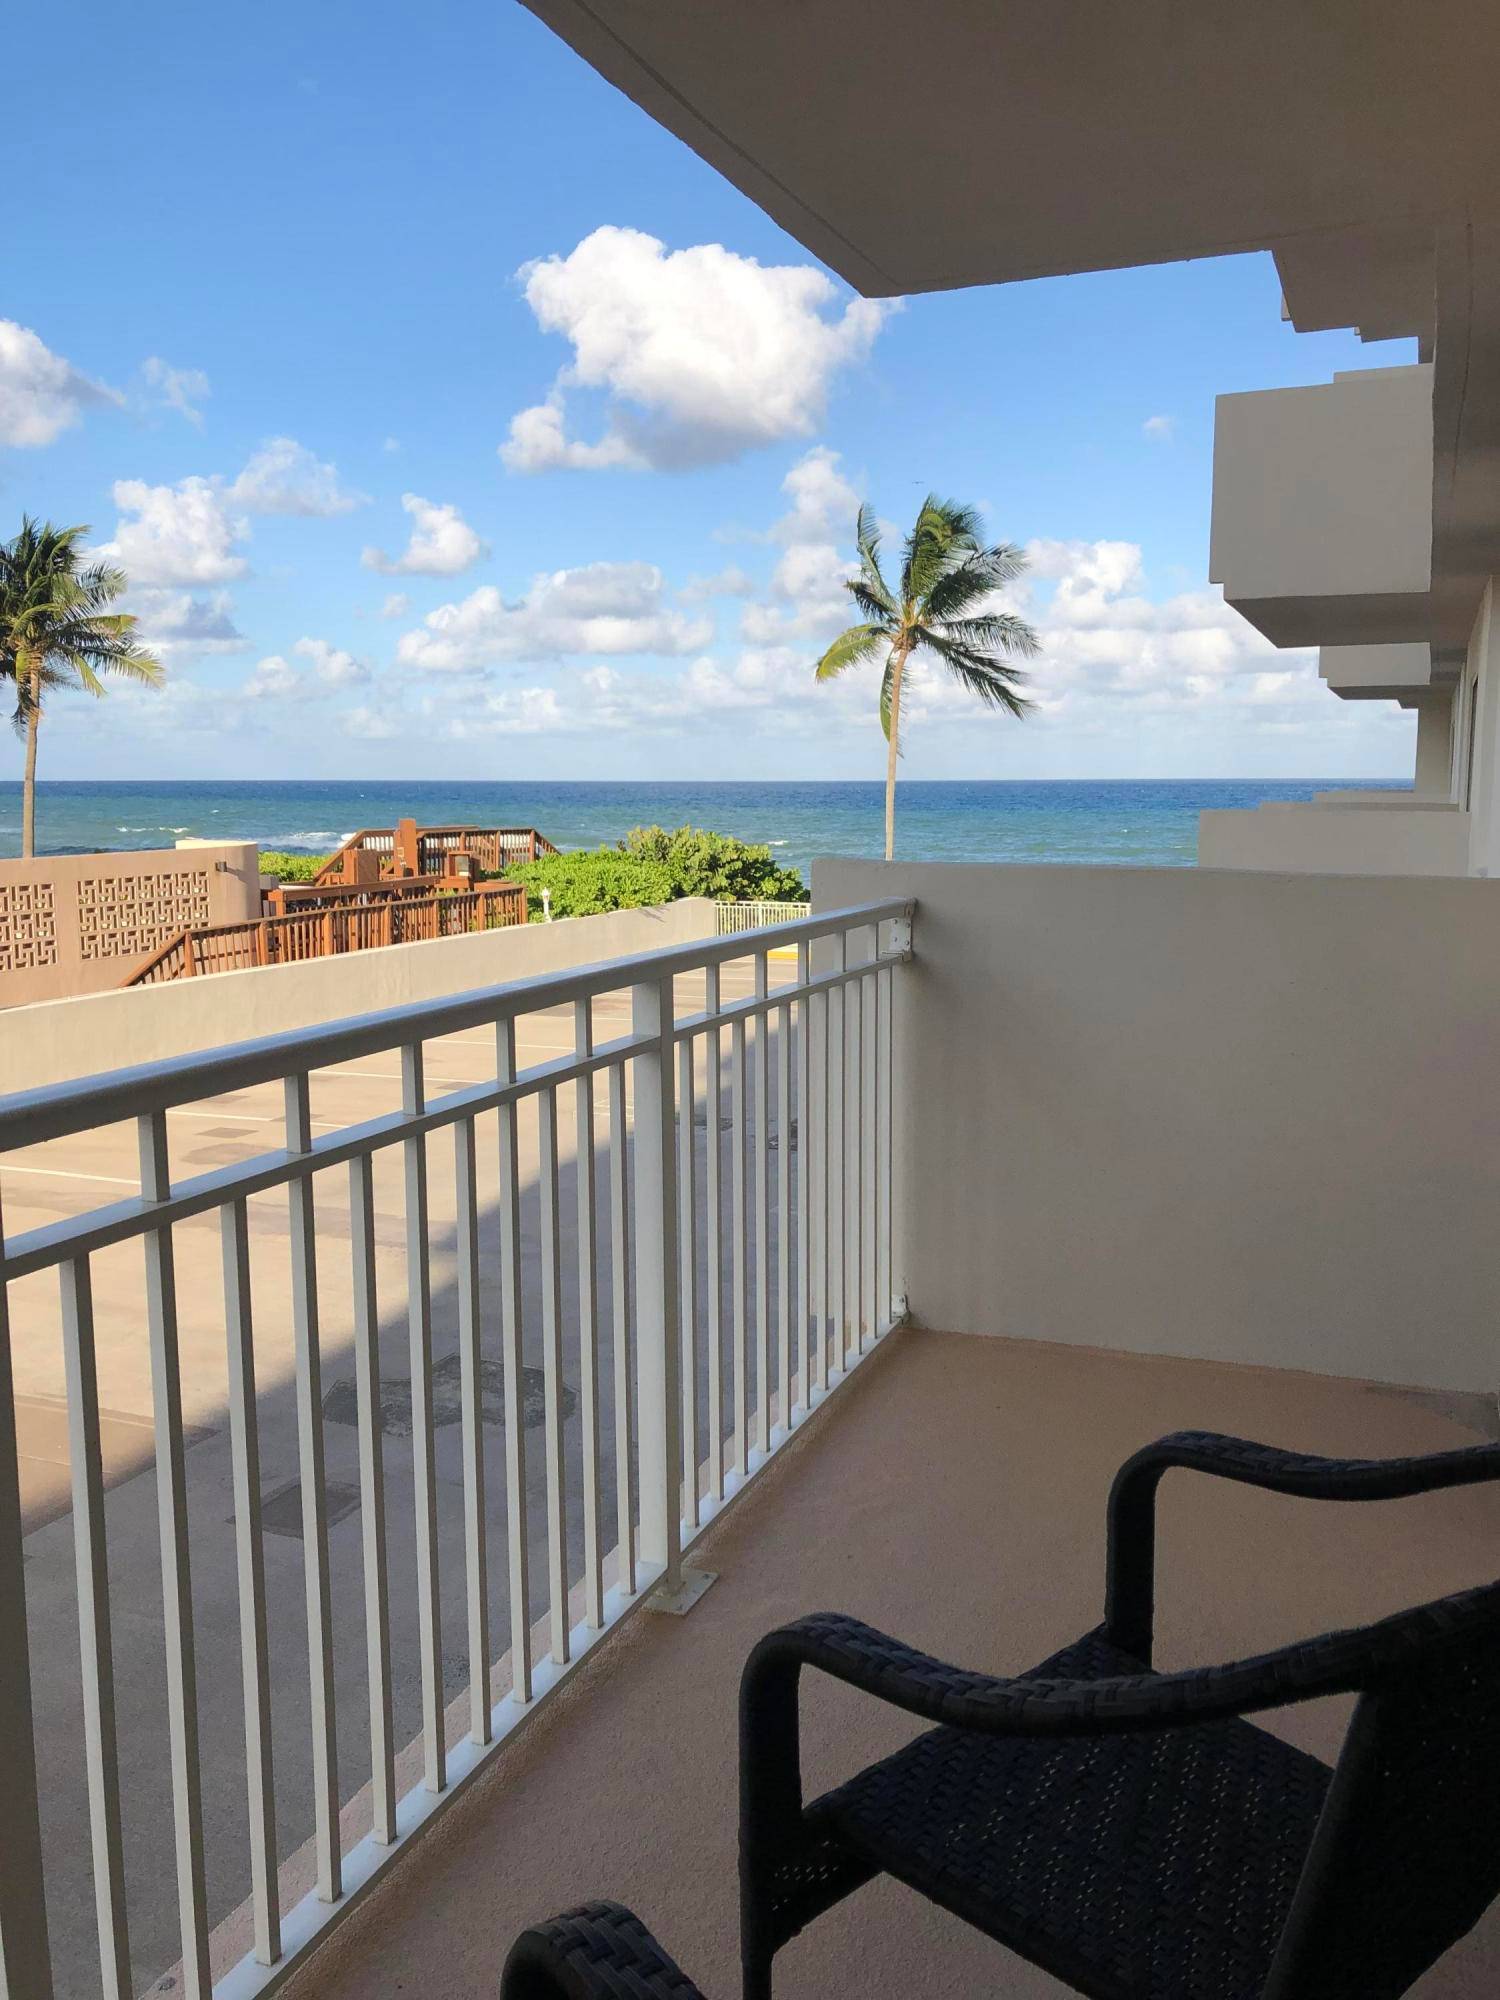 Embrace the season in this classic 2 bedroom, 2 bath coastal style condo by the sea.